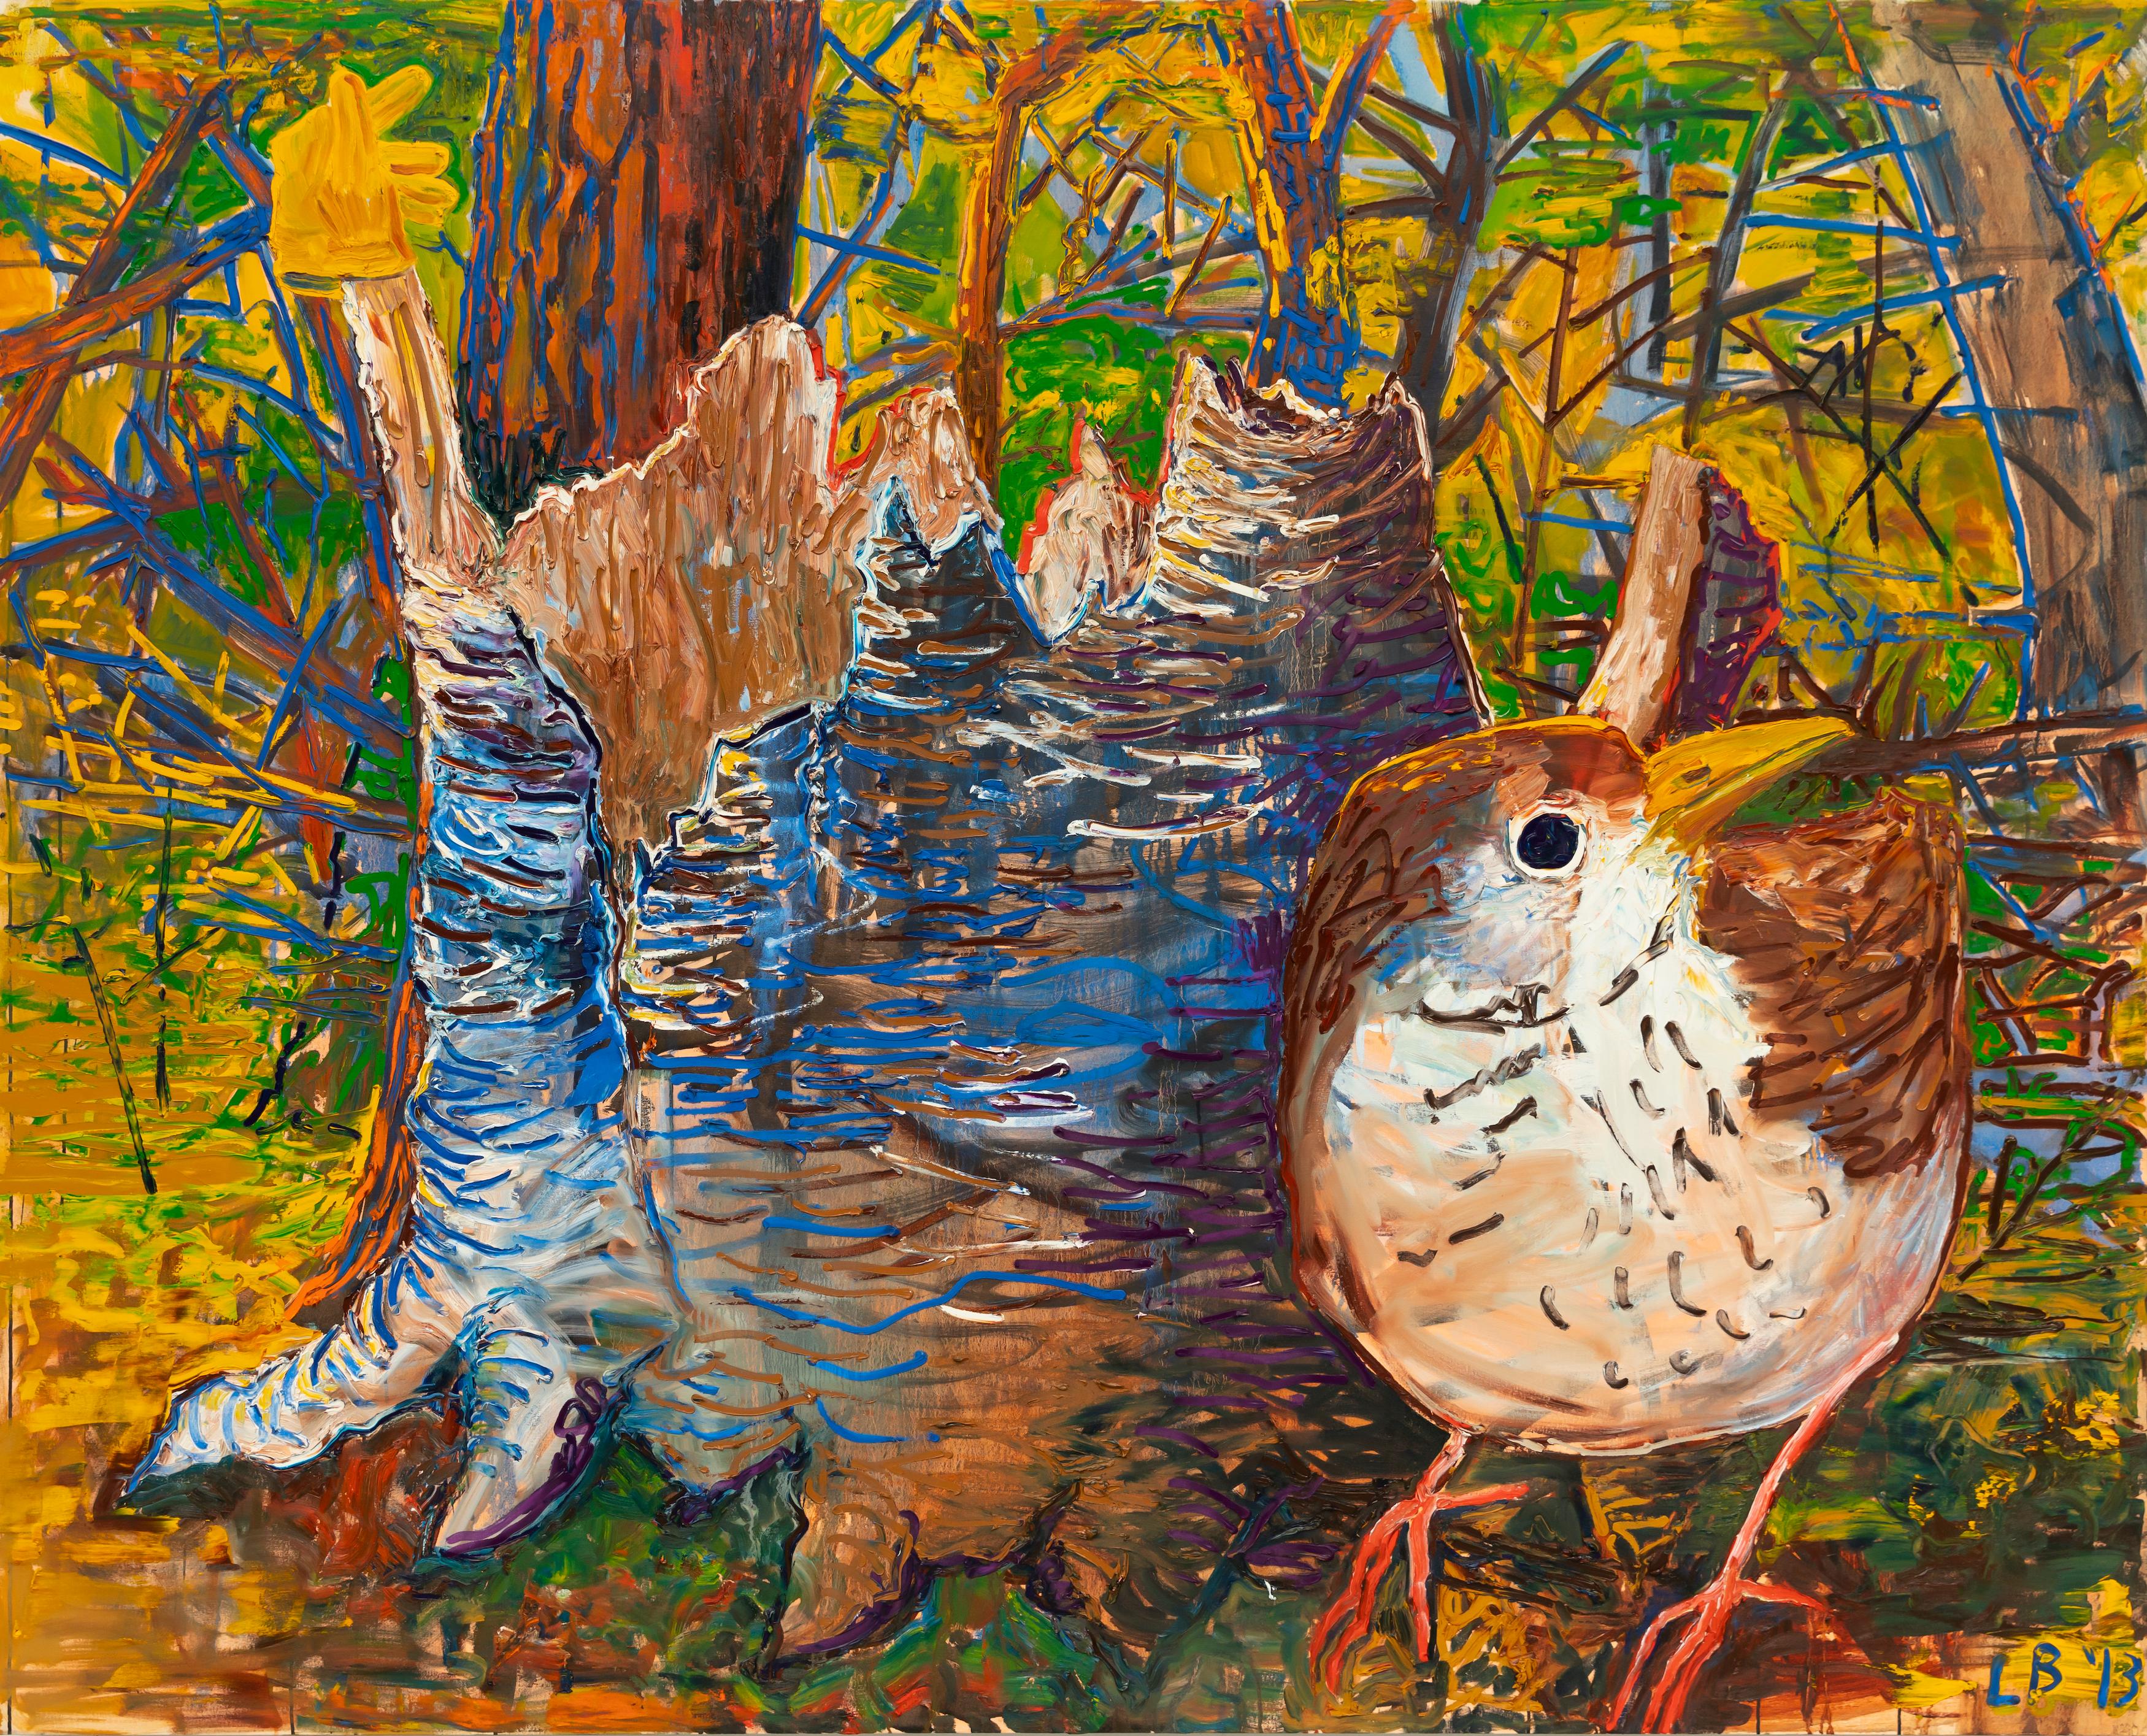 The Yellow Grove, Oil on Canvas, 2013 - Painting by Leslie Bostrom